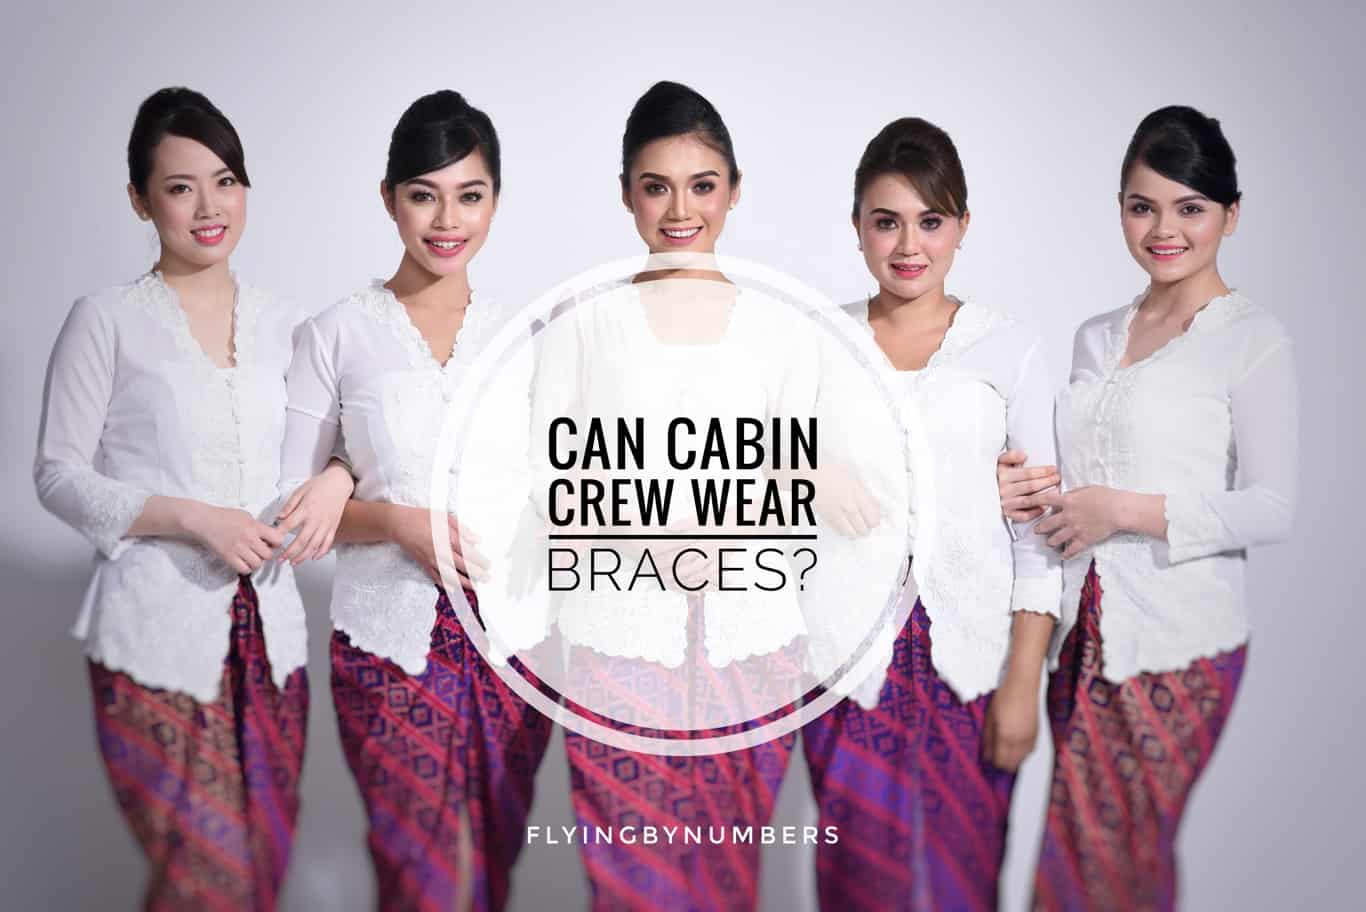 Can cabin crew wear braces? Indonesian airline flight attendants pictured can’t